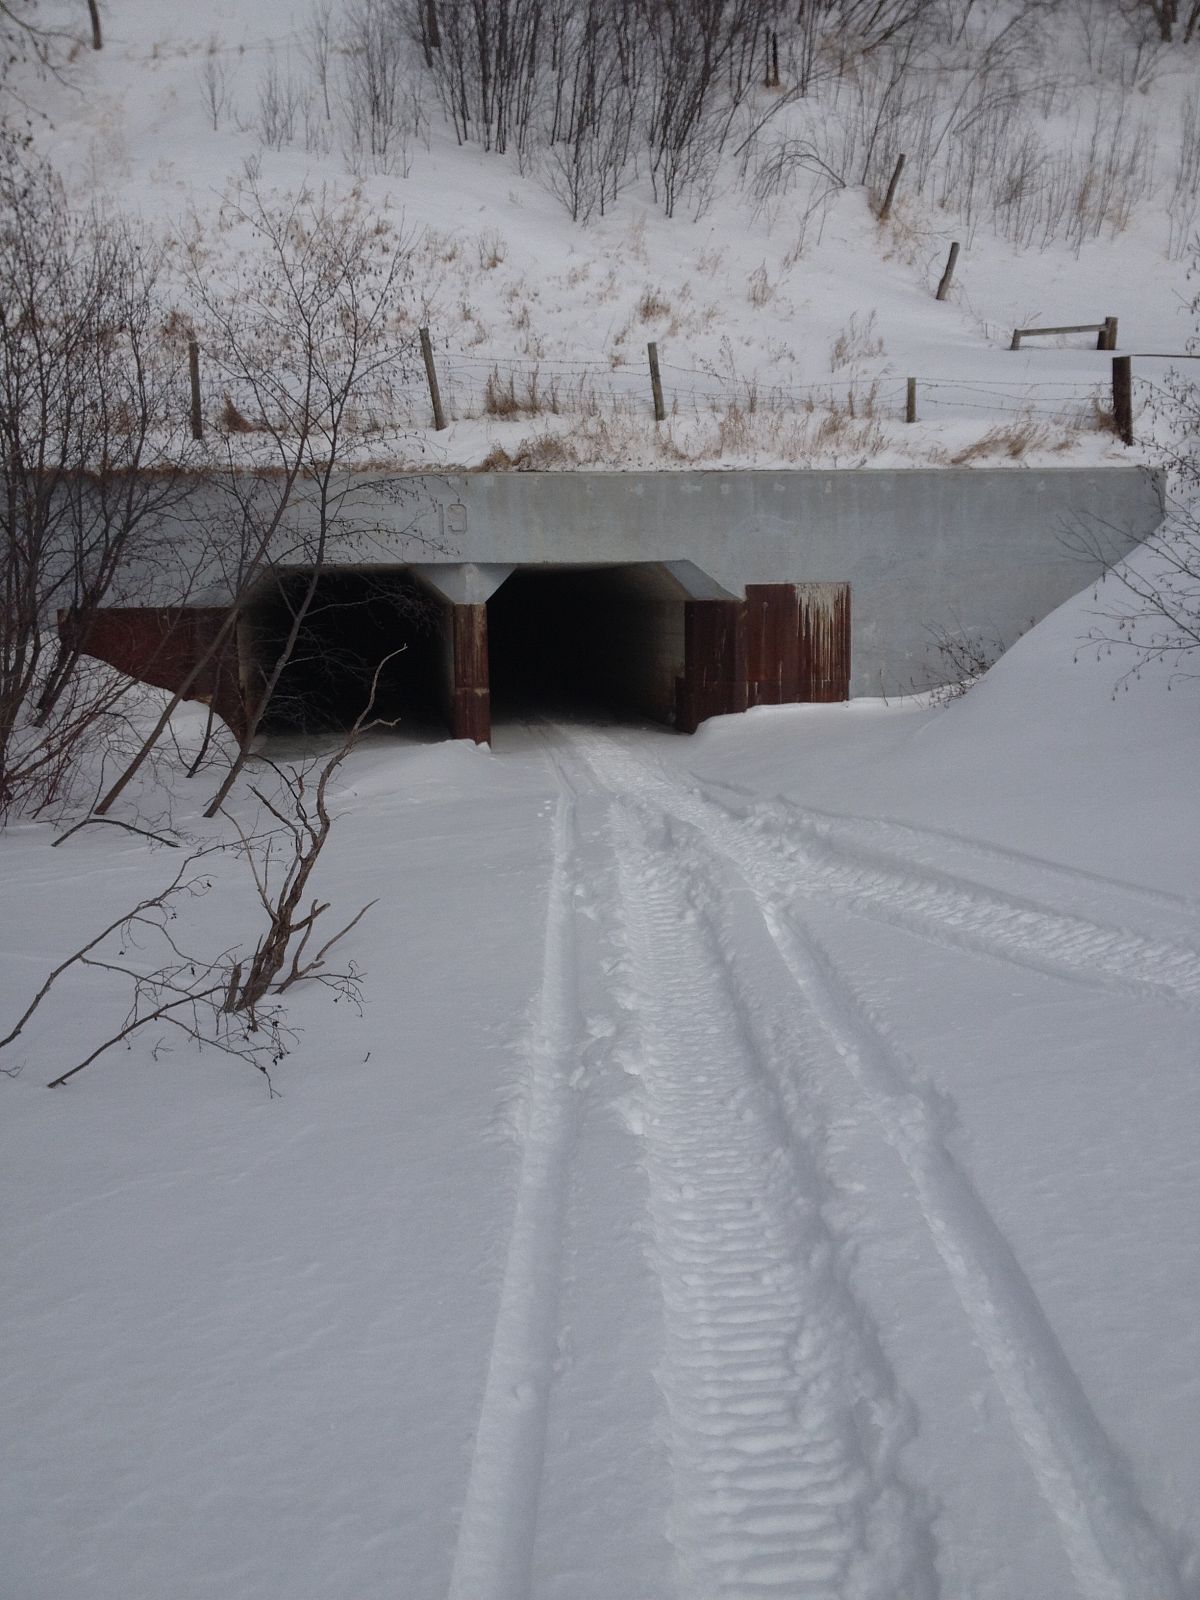 Go through tunnel but don't go any further. Turn around after the end.  Too much open water! 